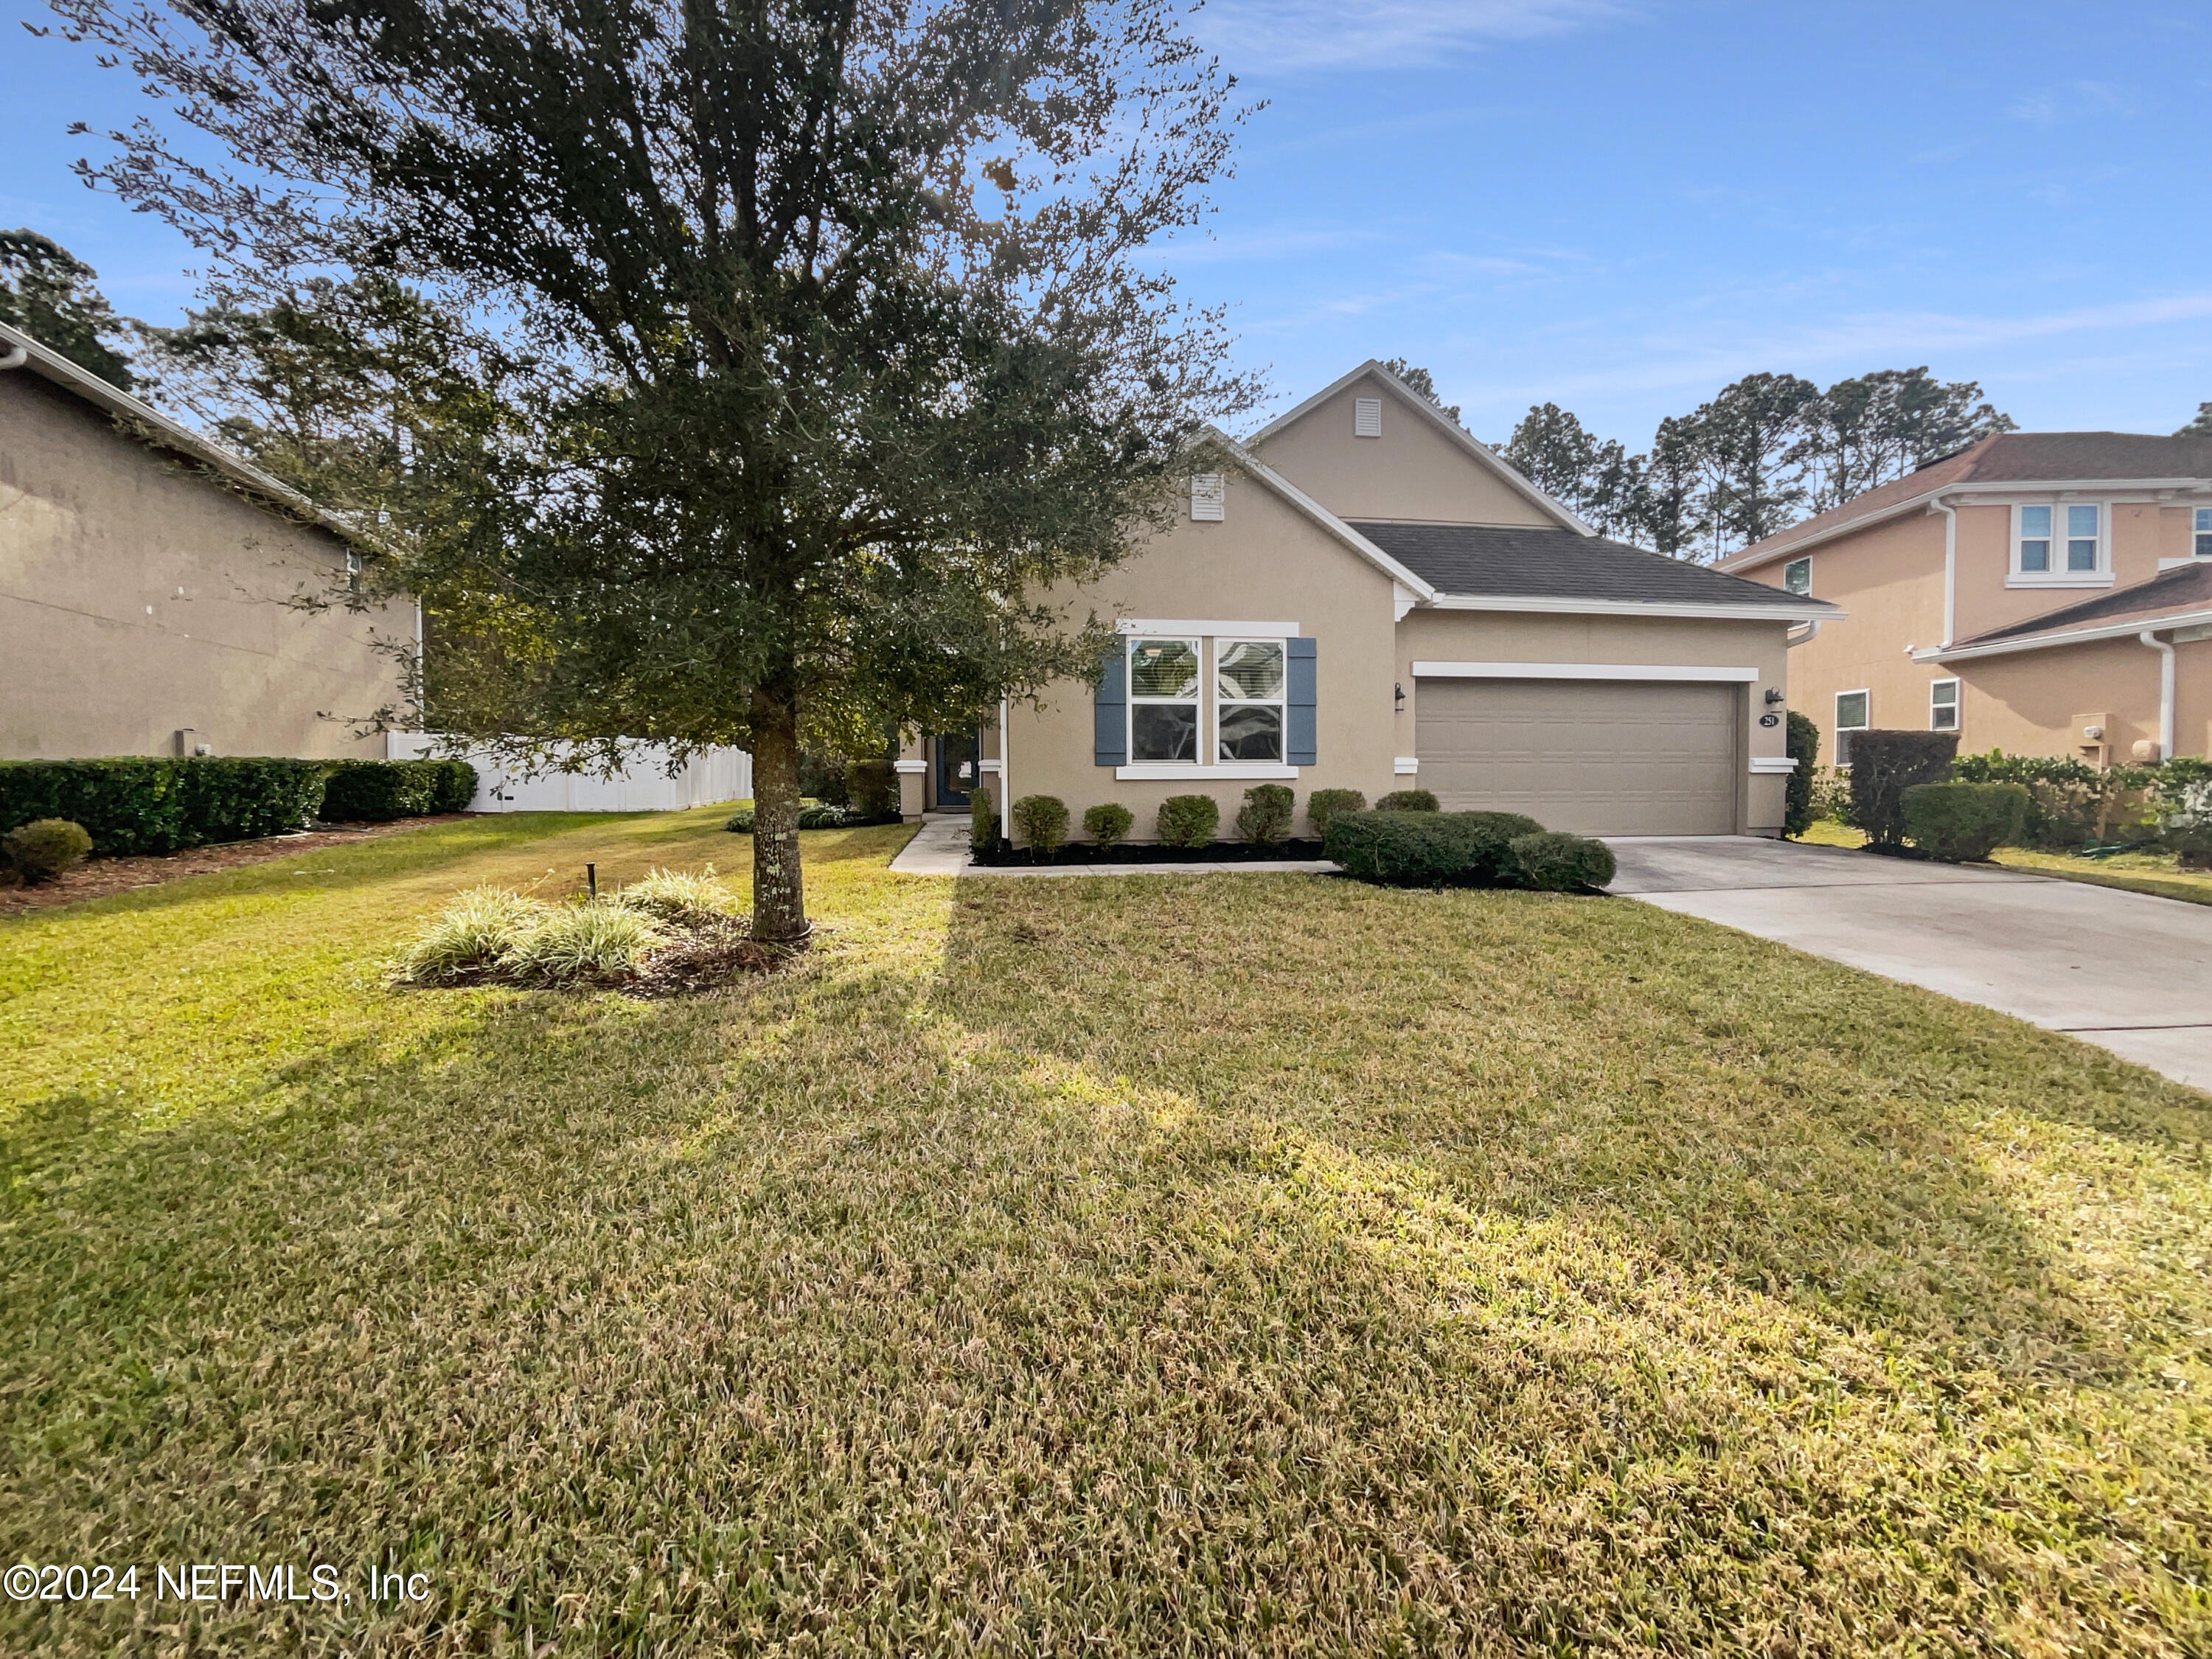 St Johns, FL home for sale located at 251 HERITAGE OAKS Drive, St Johns, FL 32259